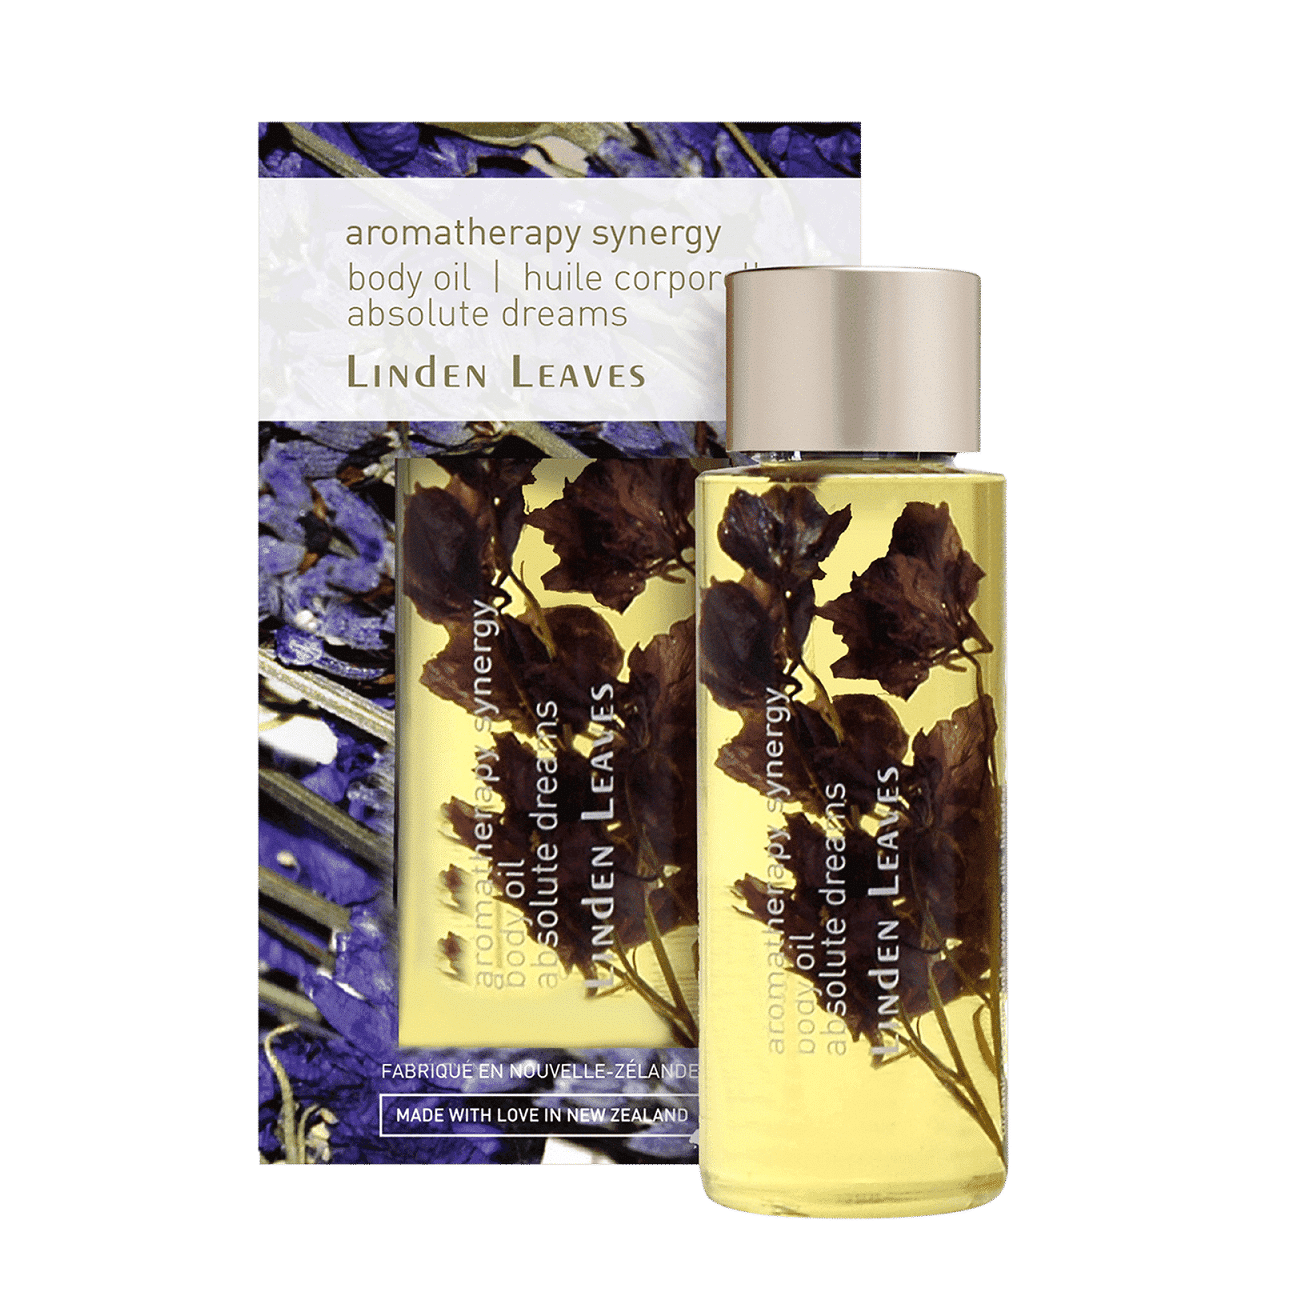 Linden Leaves Body Oil Absolute Dreams.